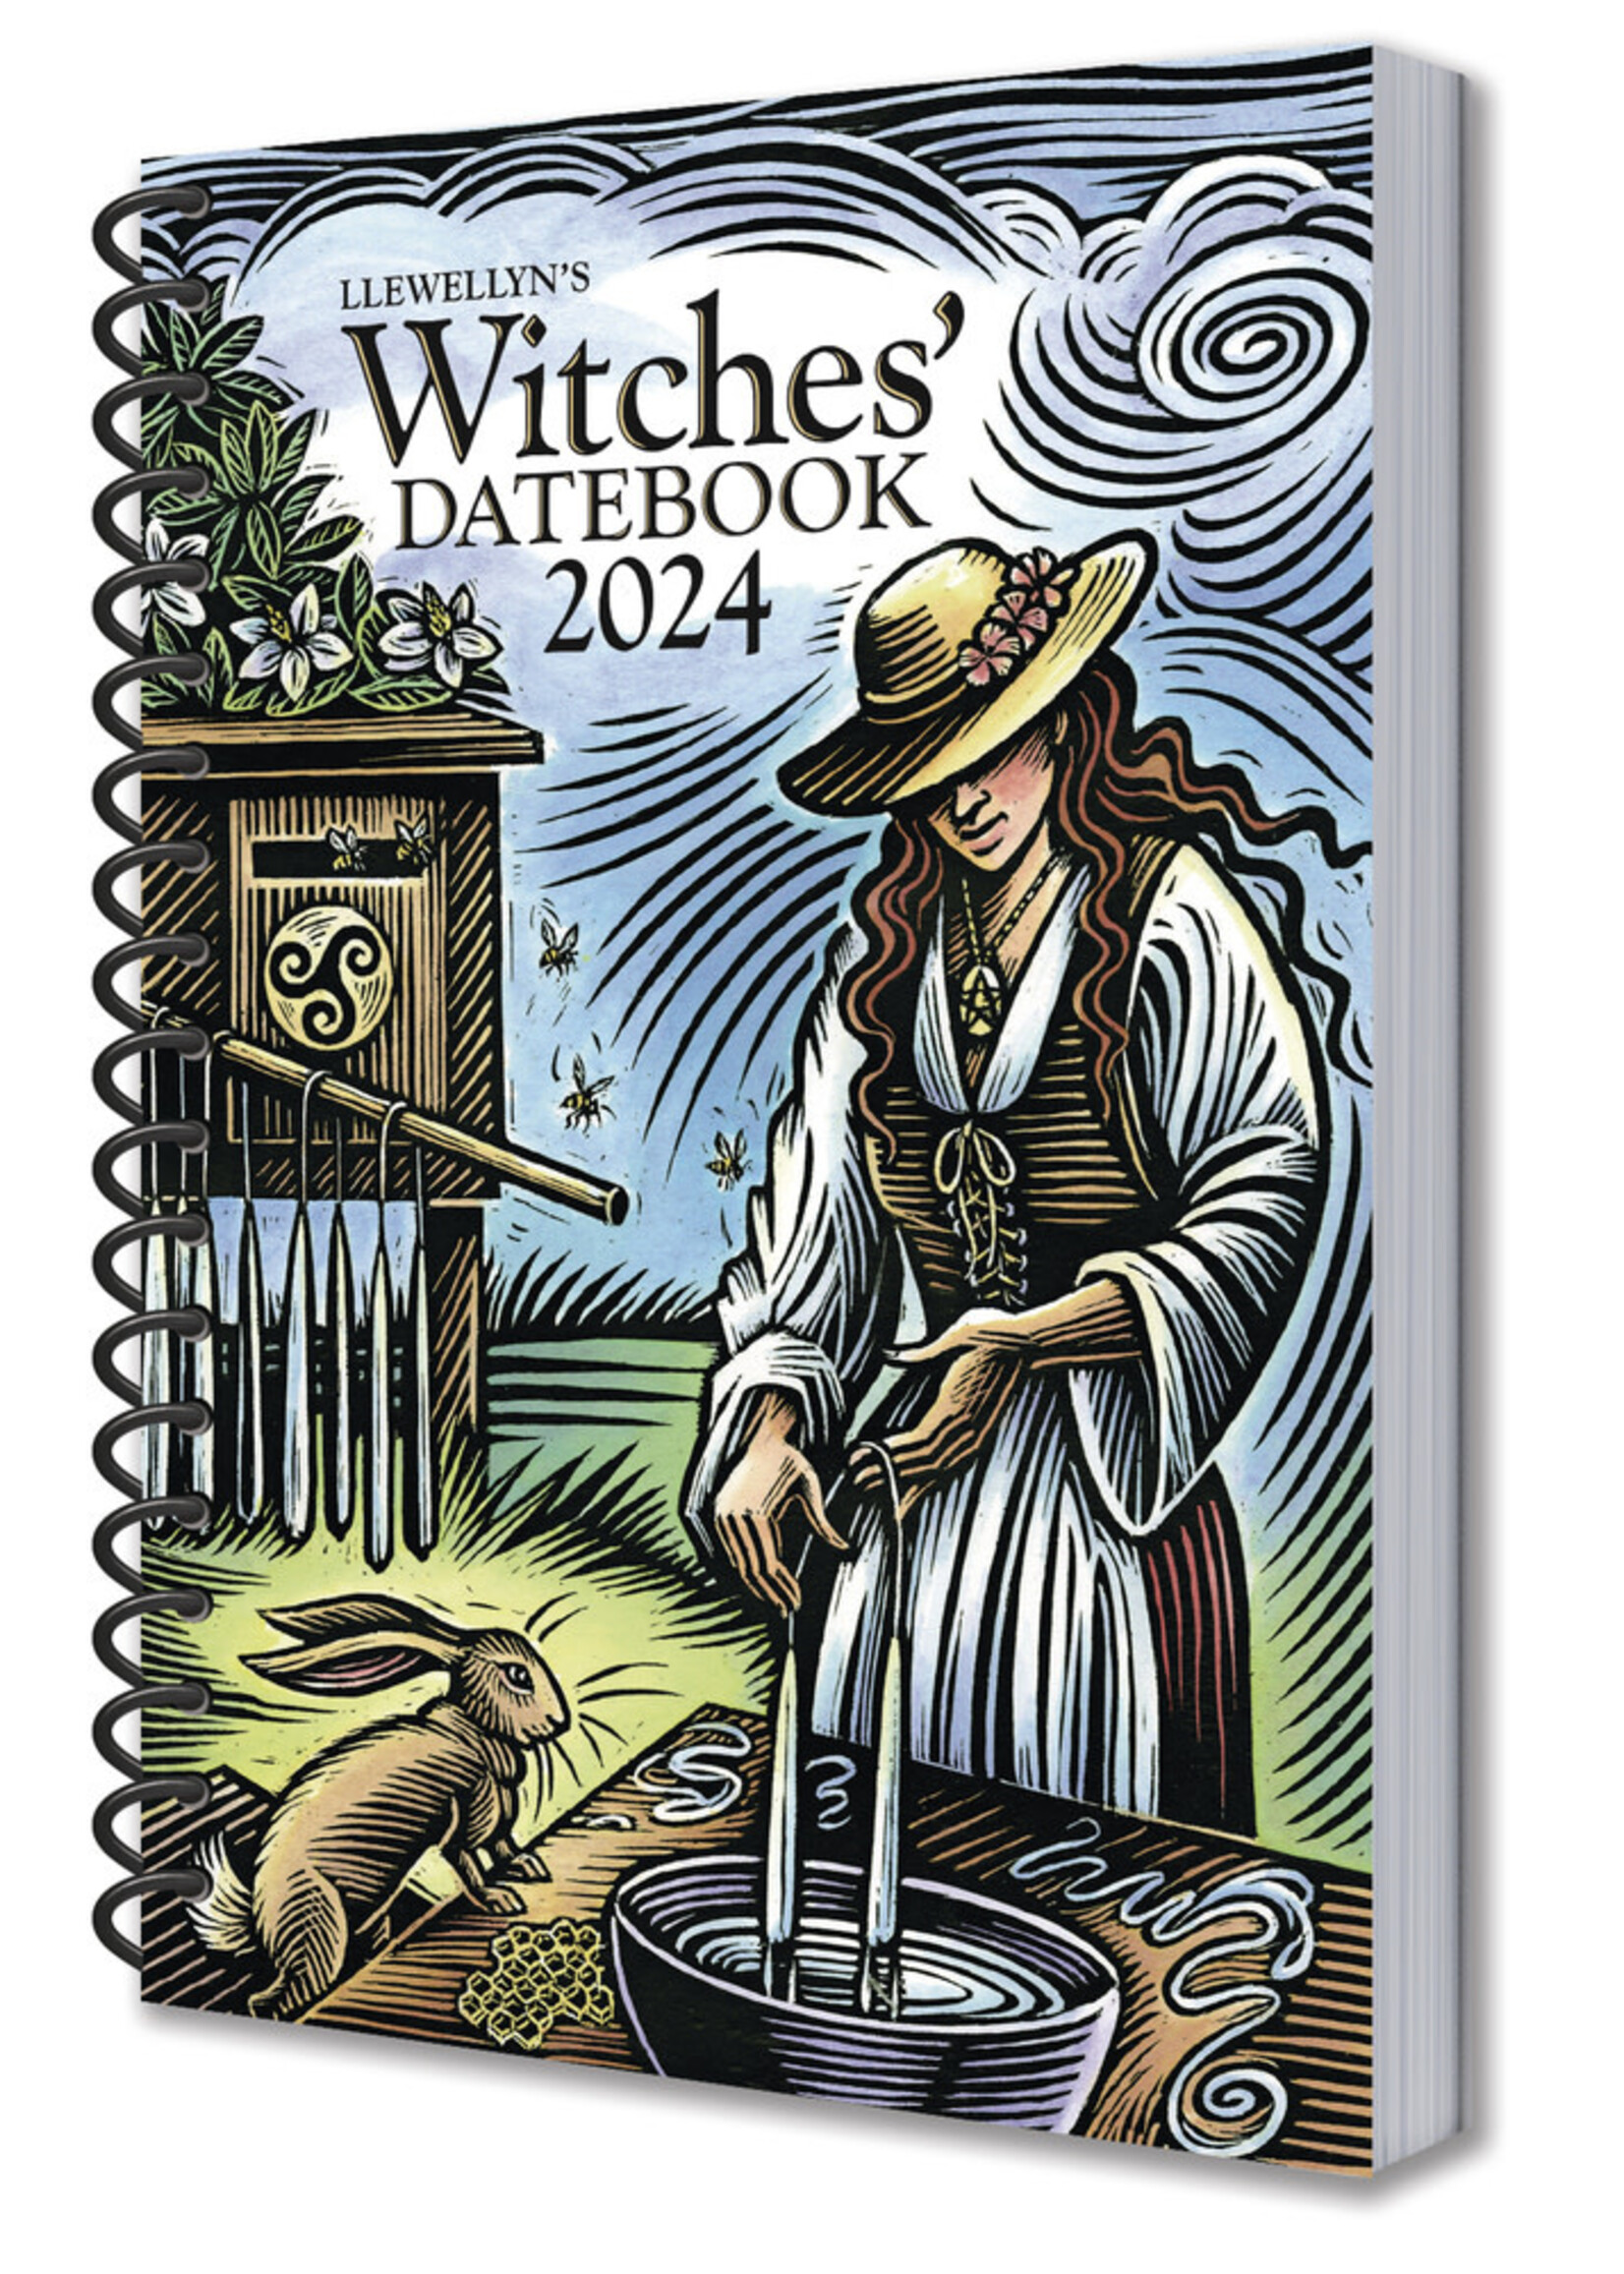 Llewellyn's 2024 Witches Datebook